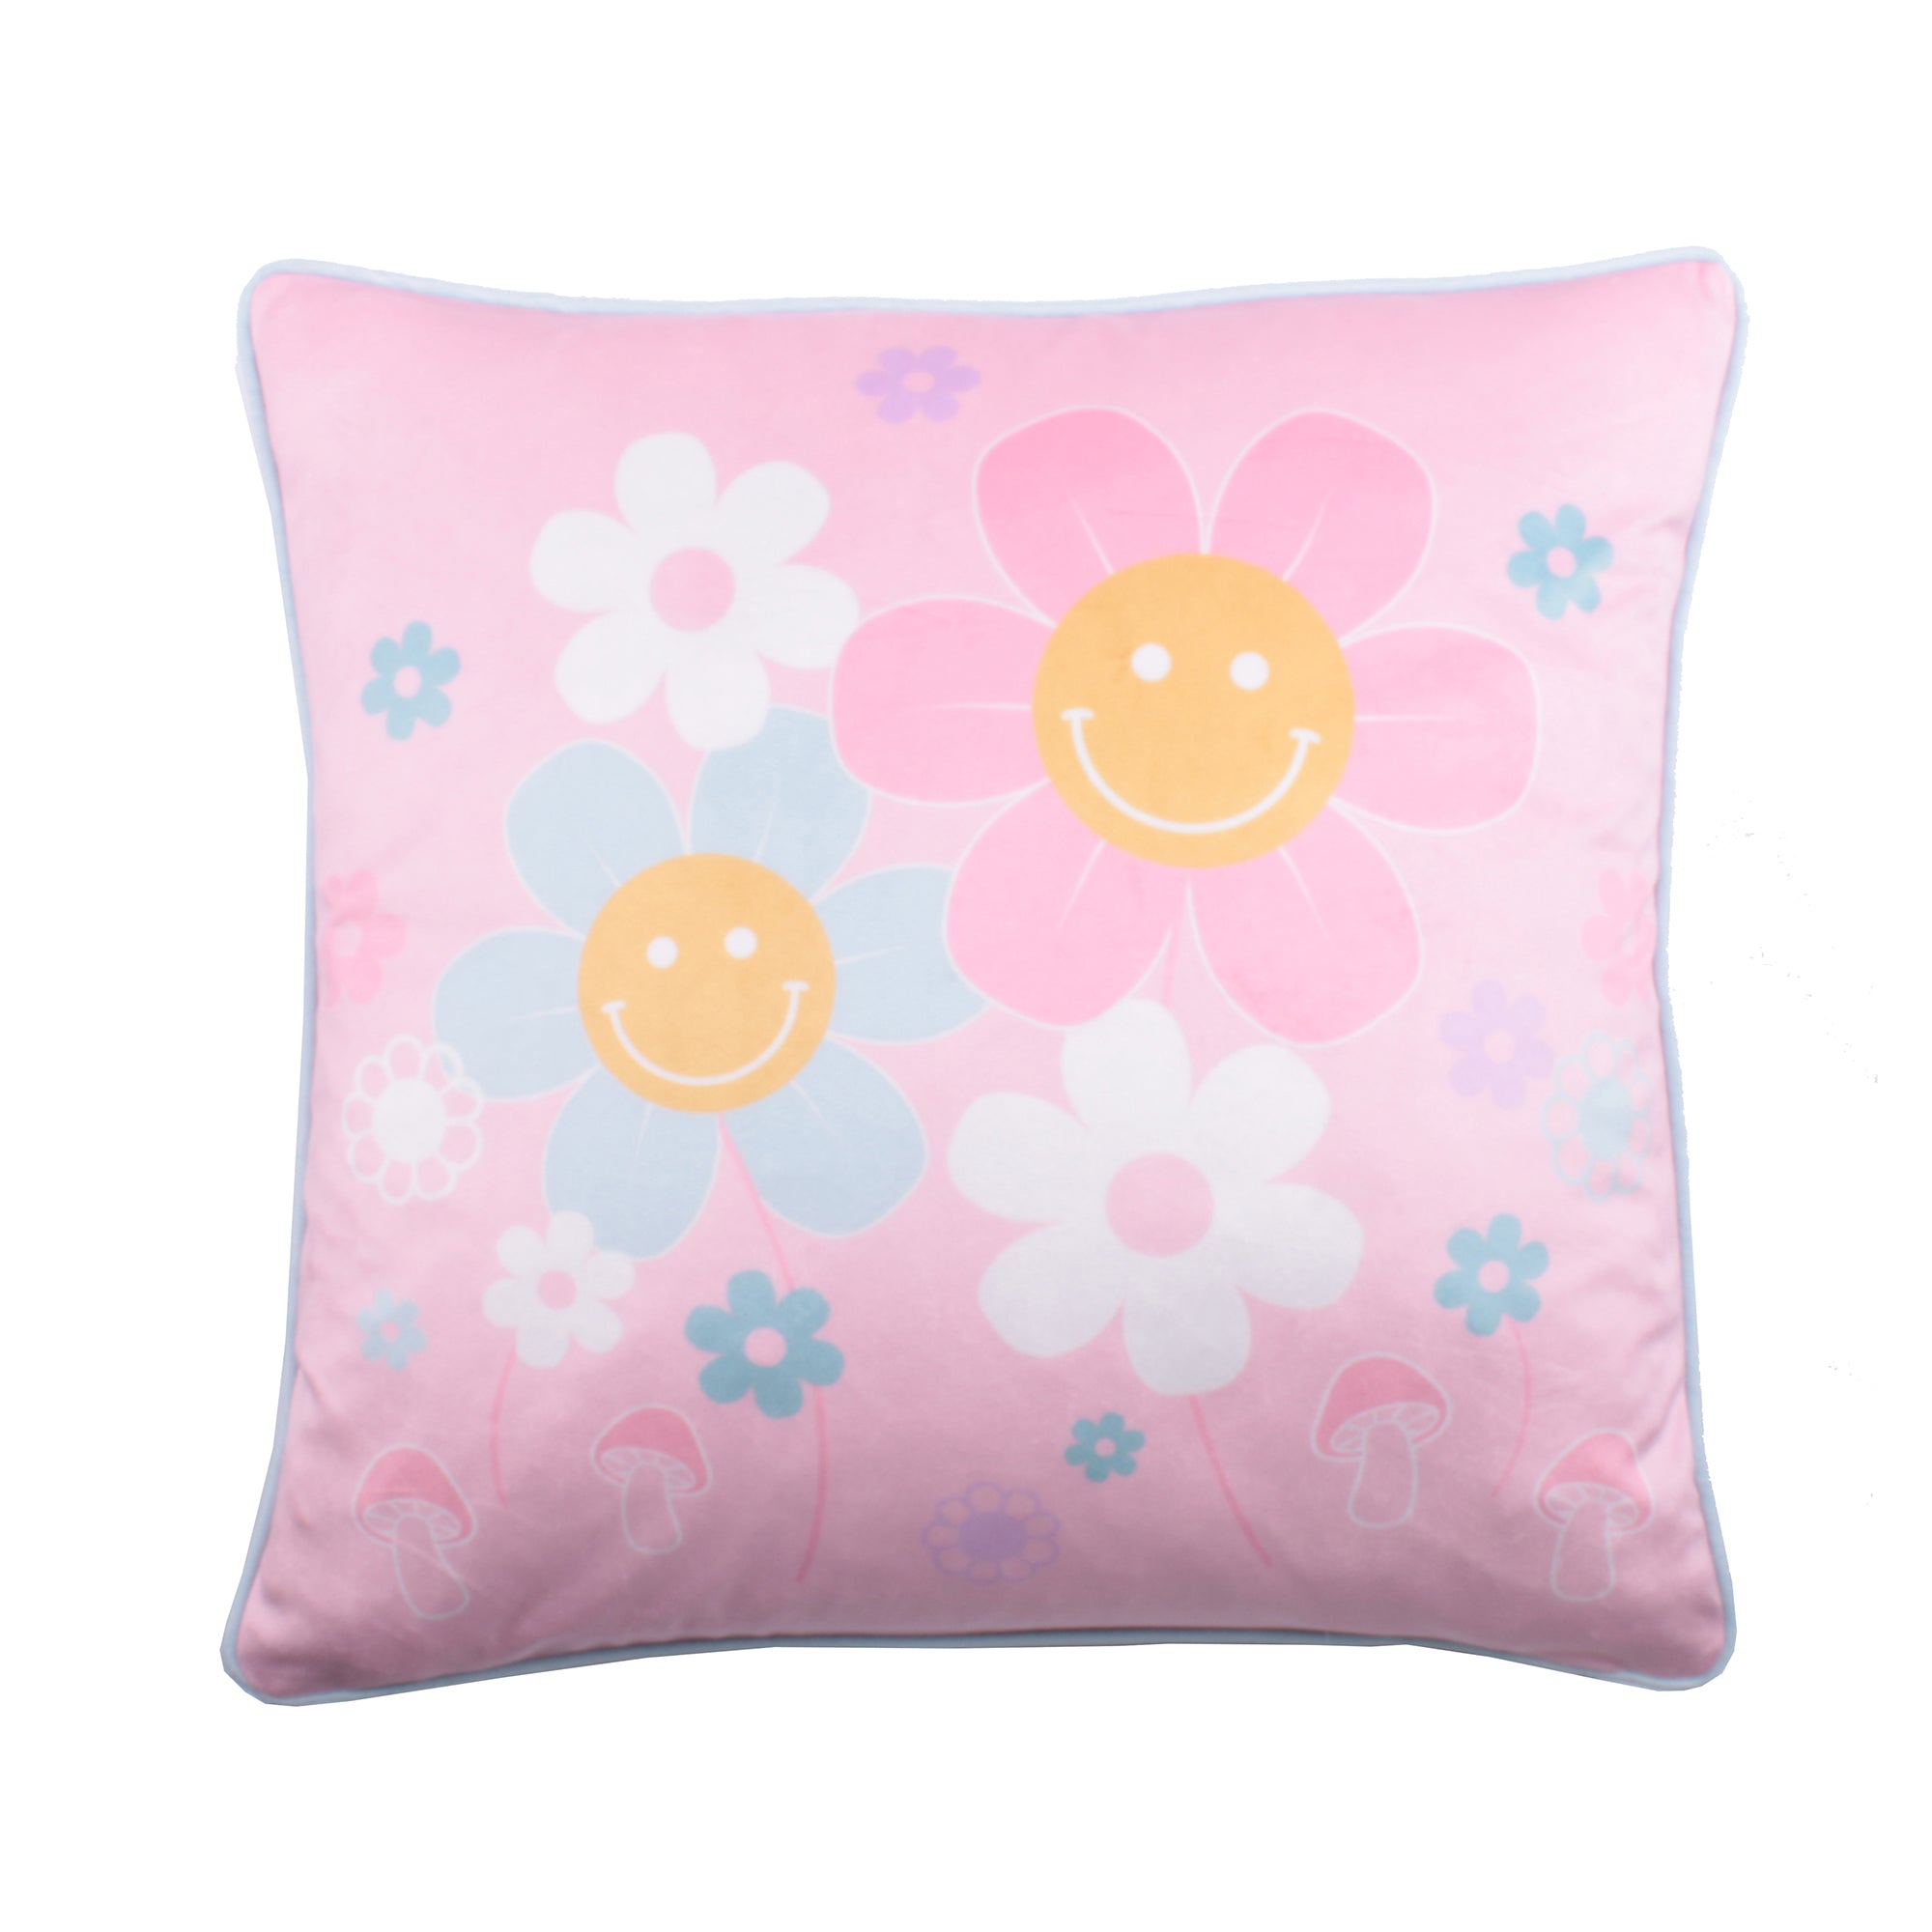 Filled Cushion Retro Flower by Bedlam in Pink